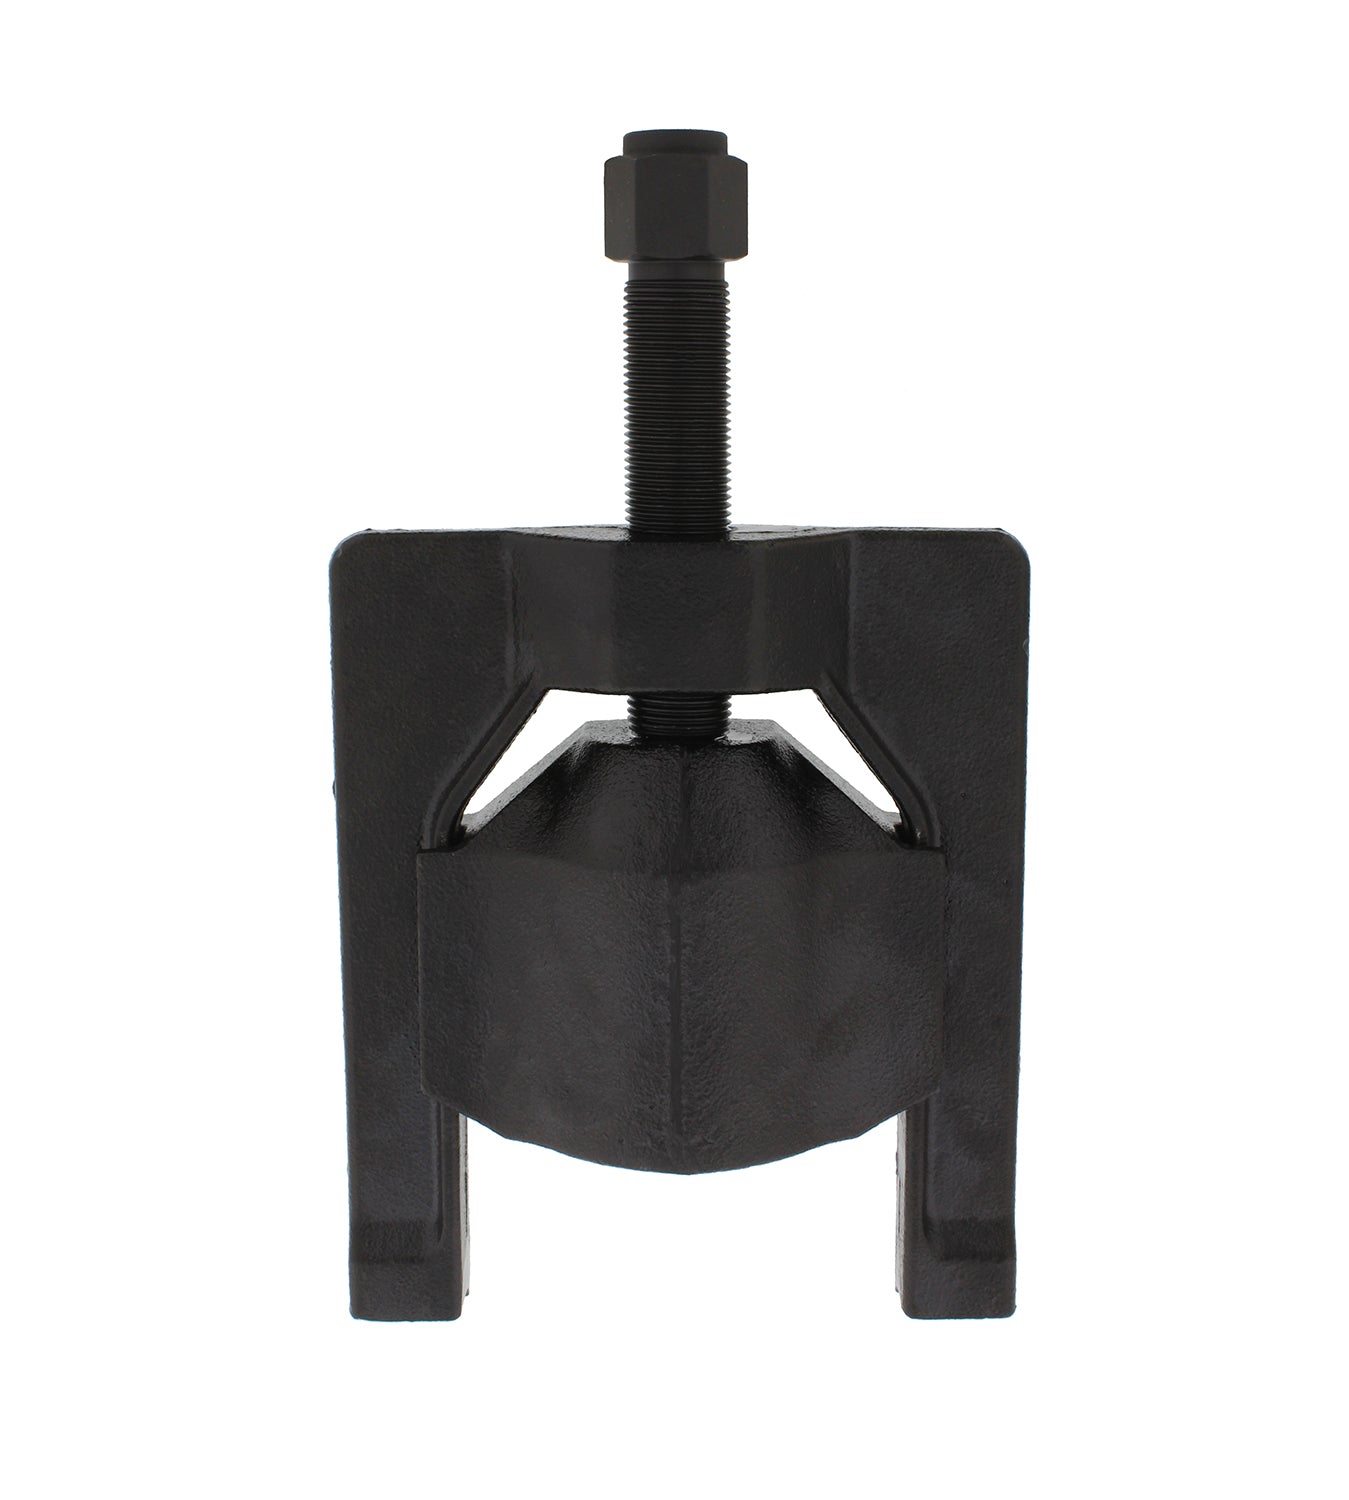 U-Joint Puller Removal Tool for Spicer Meritor Rockwell Class 7 & 8